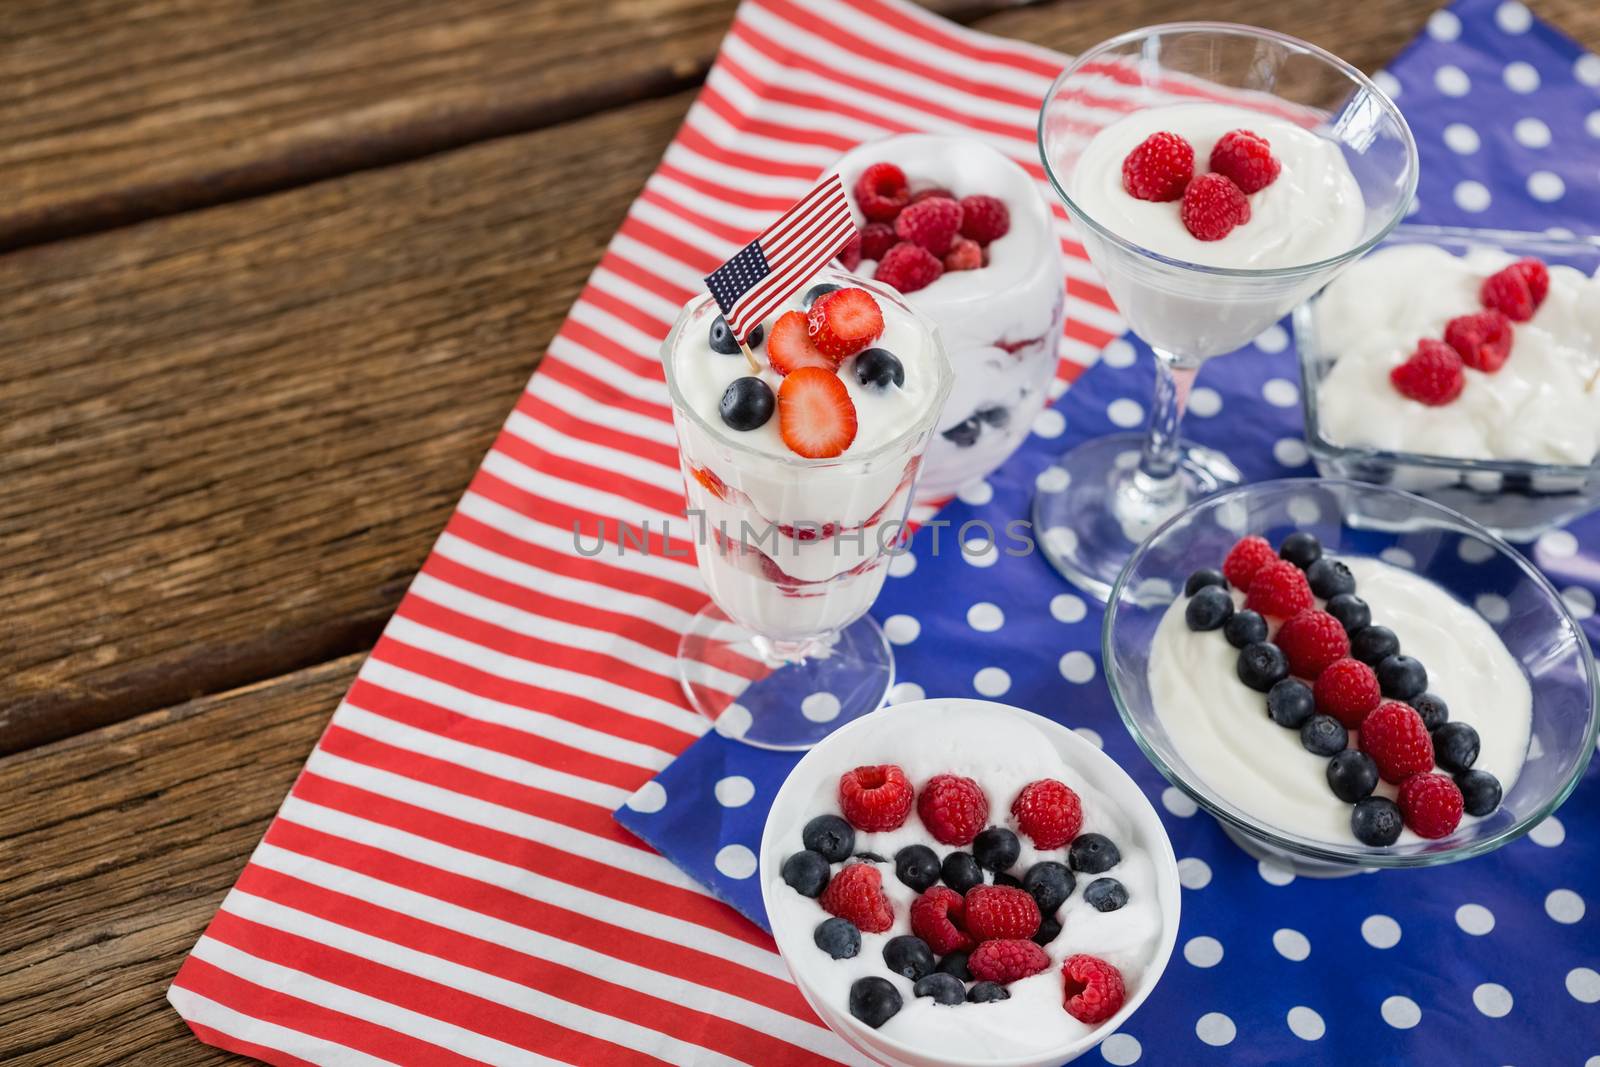 Fruit ice cream with 4th july theme by Wavebreakmedia